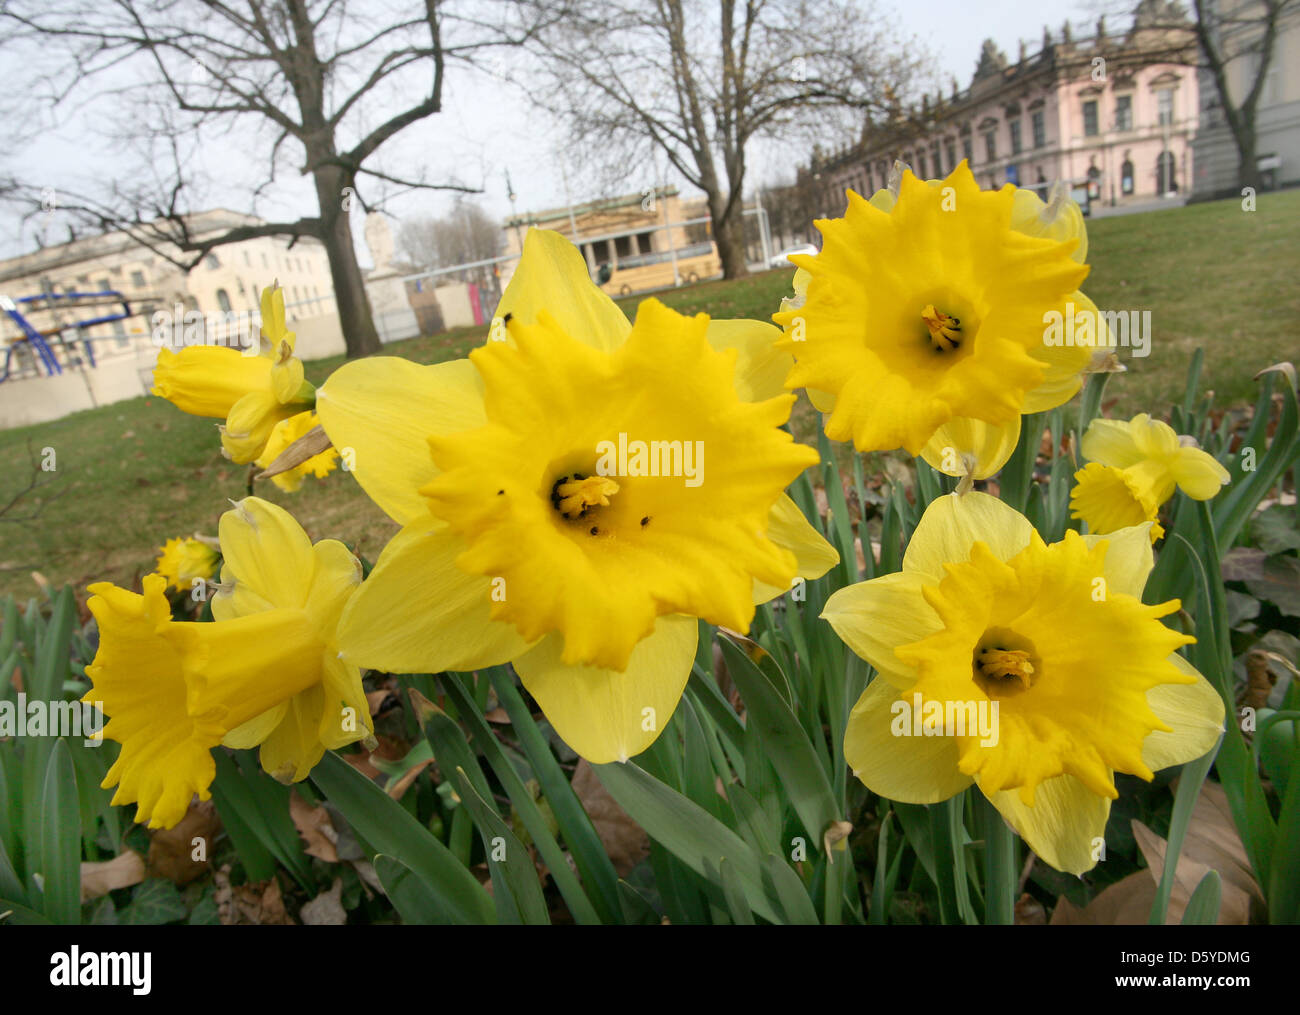 Daffodils blossom at the boulevard Unter den Linden in Berlin, Germany, 27 March 2012. Photo: Stephanie Pilick Stock Photo